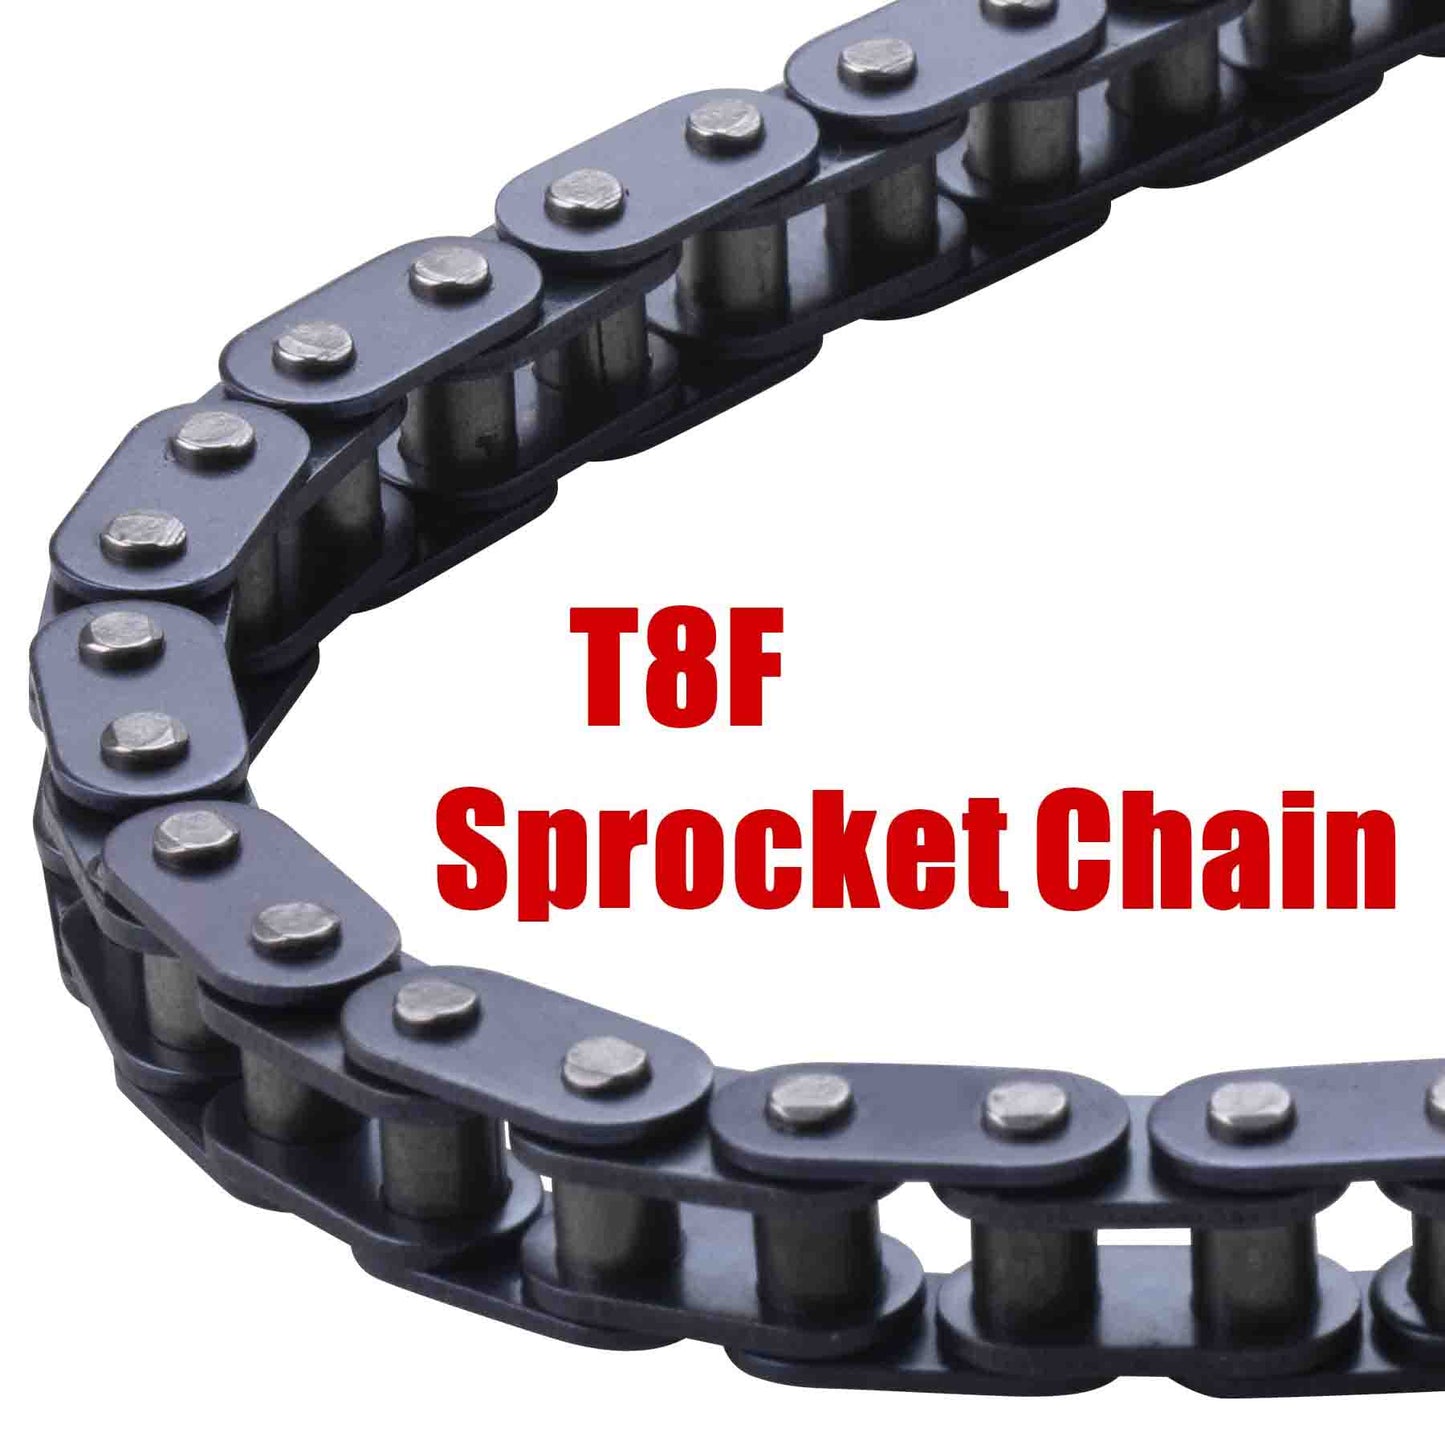 SYX MOTO Chain for PAE ATV, T8F 80 Links